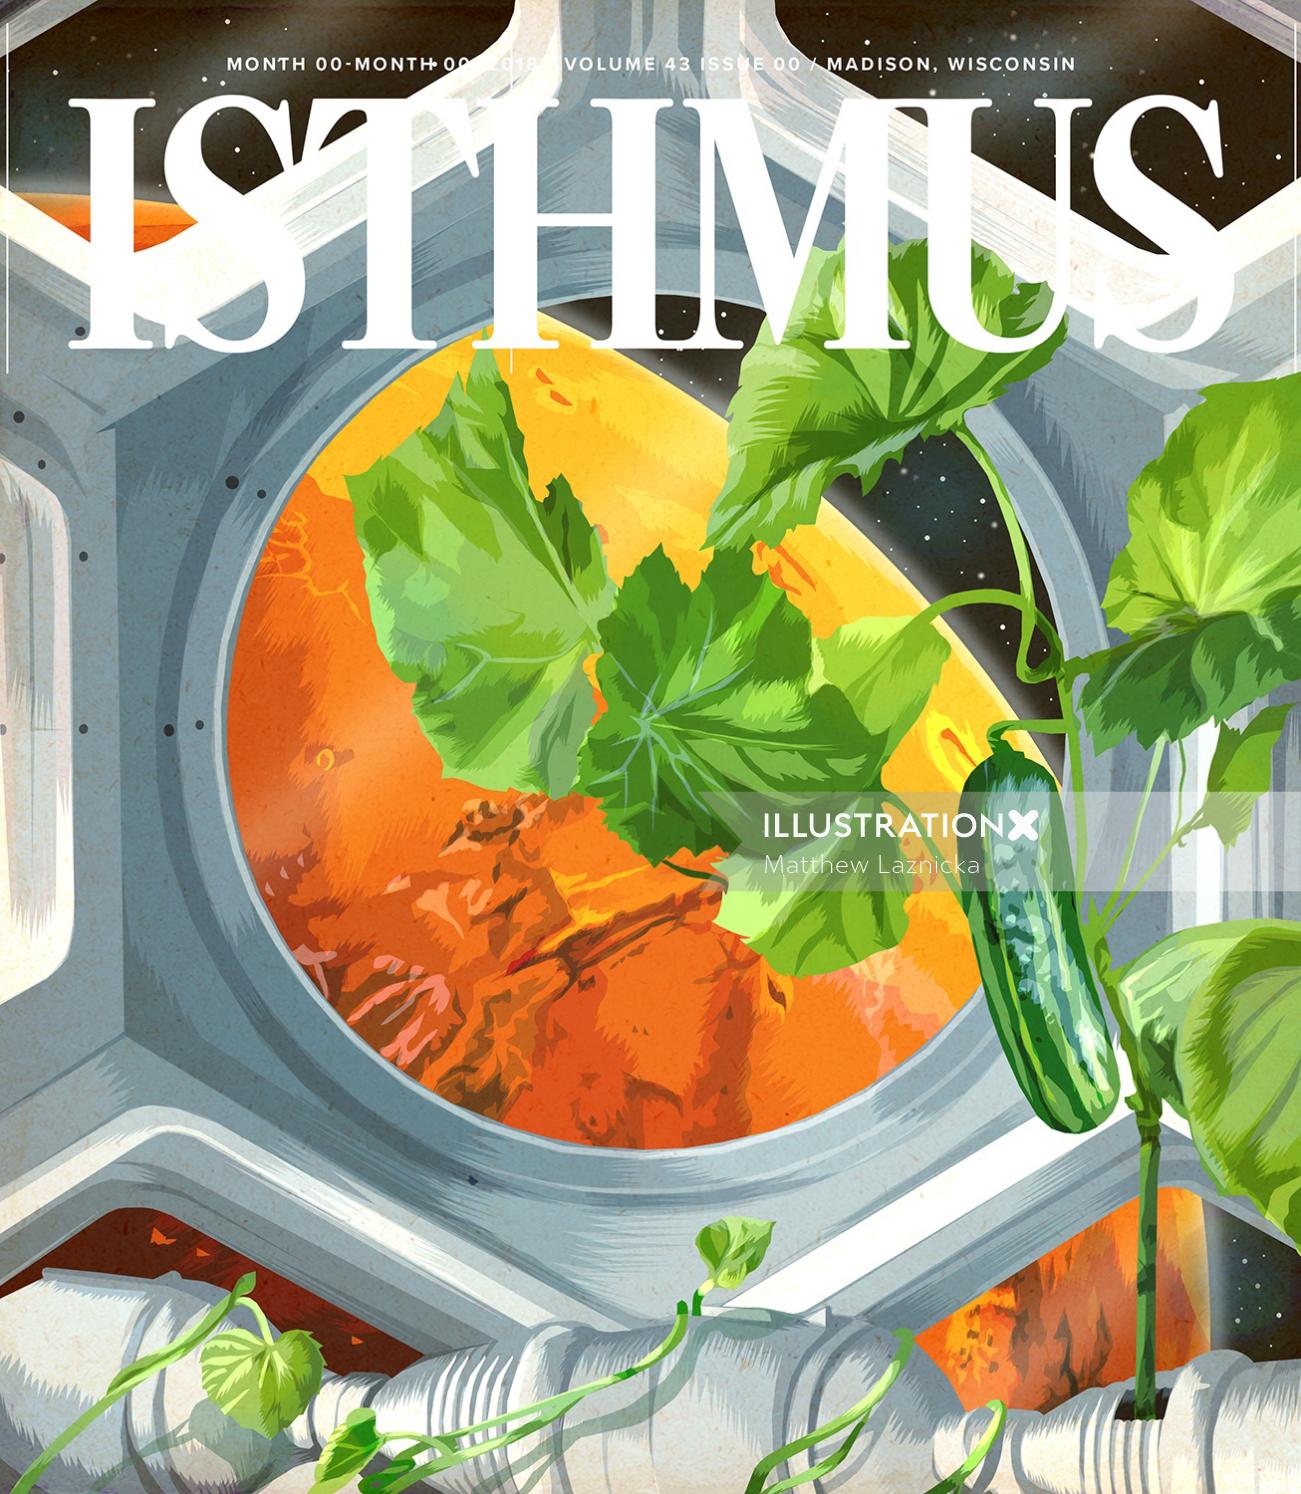 Editorial Isthmus plants in space